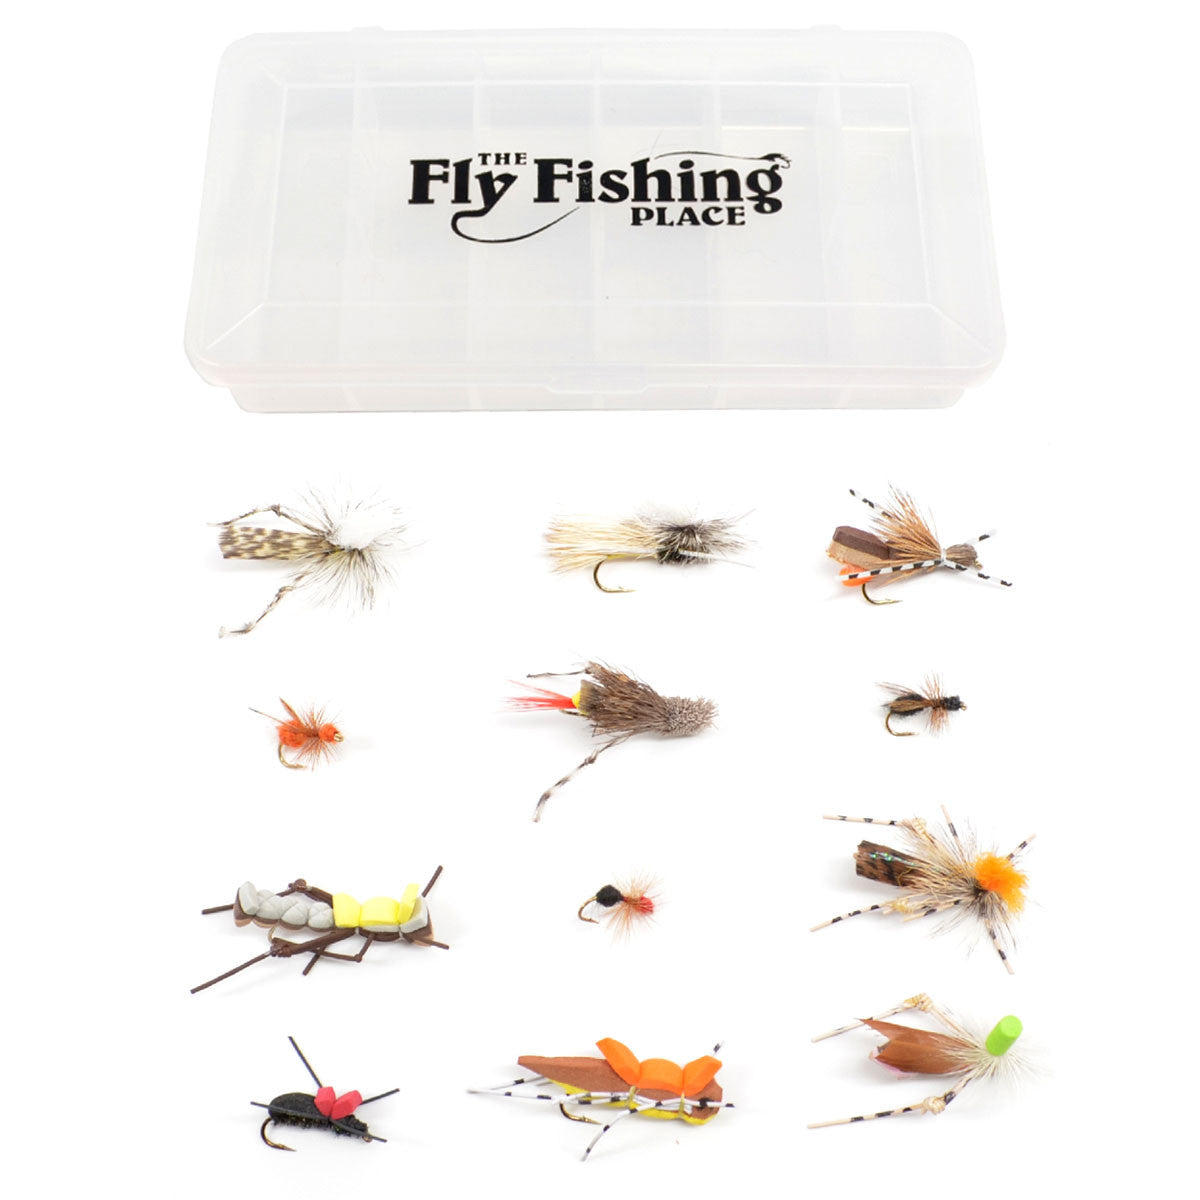 Trout Fly Assortment - Essential Terrestrials Fly Fishing Flies Collection - Includes Foam Hoppers, Ants, Beetles, and Cicadas - 1 Dozen Trout Flies with Fly Box